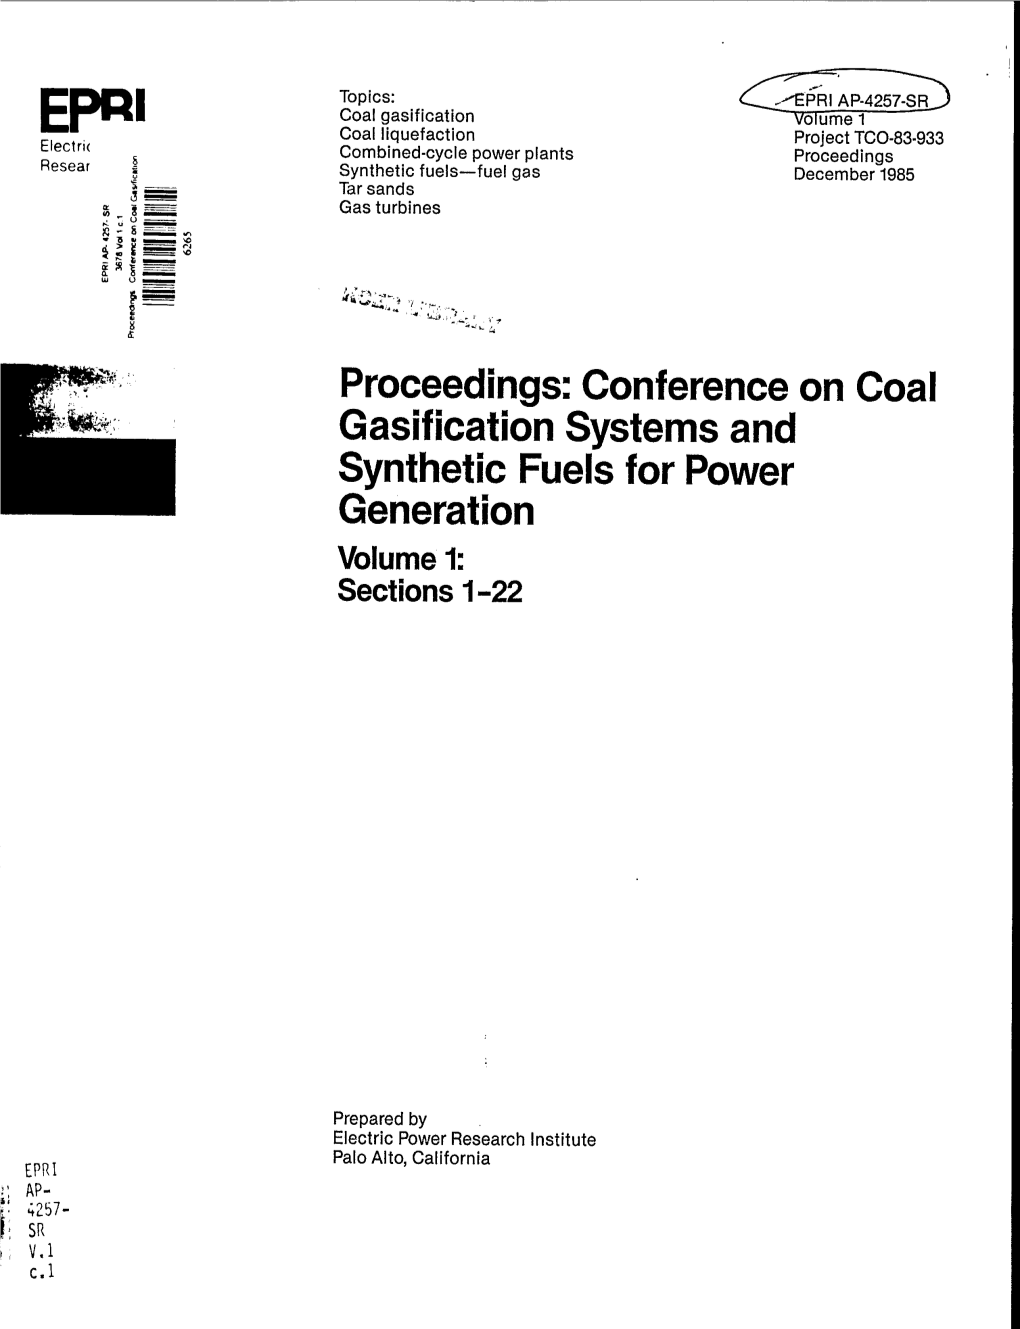 Conference on Coal Gasification Systems and Synthetic Fuels for Power Generation Volume 1: Sections 1-22